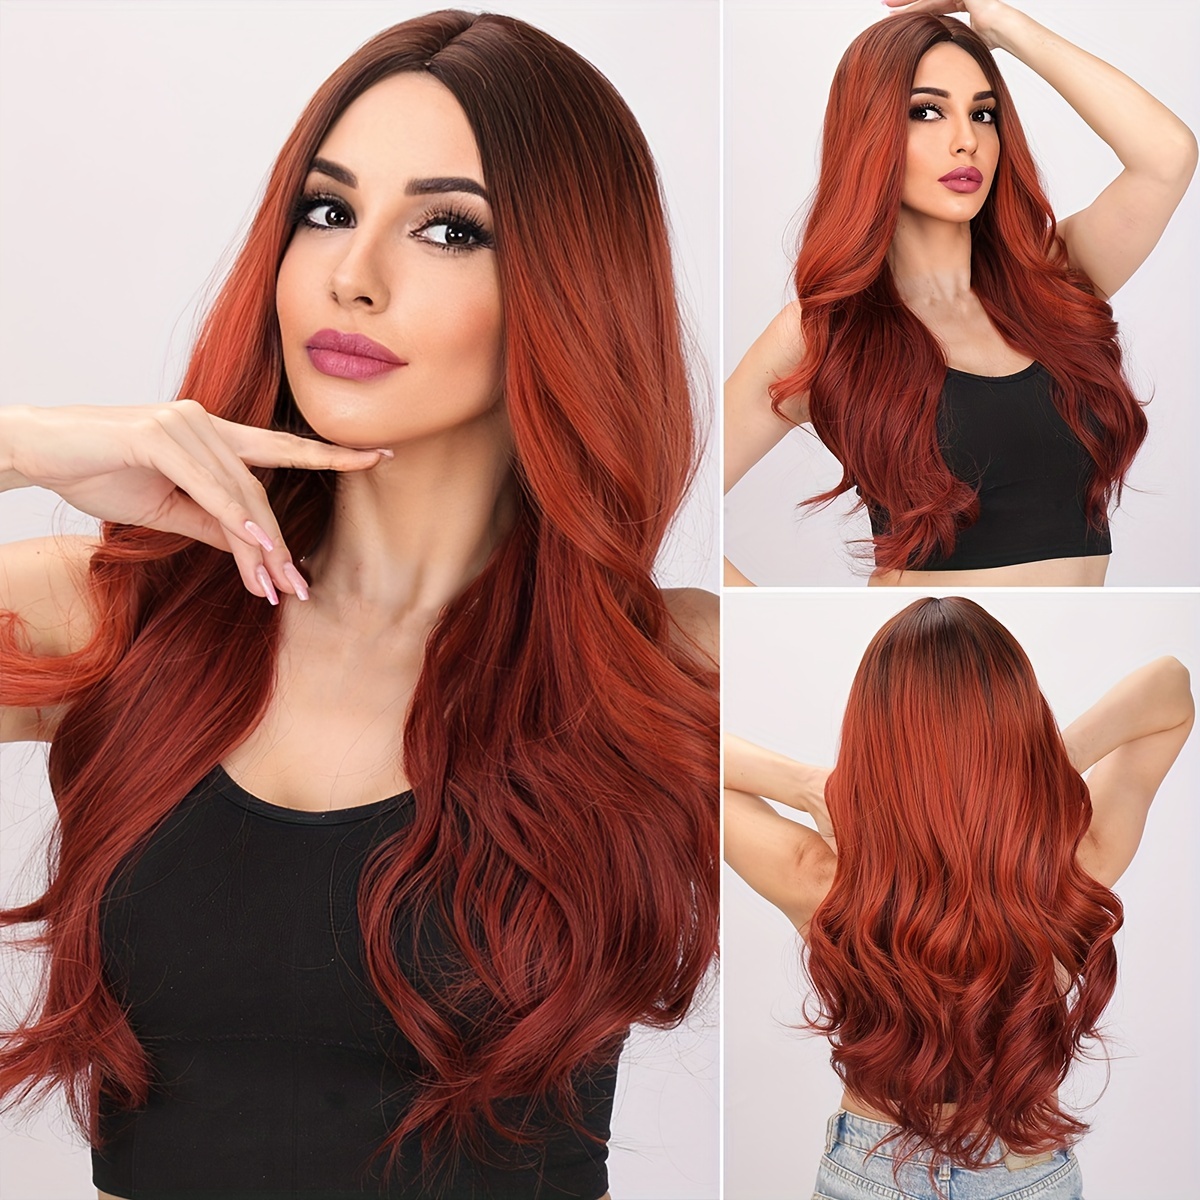 

26 Inch Women's Synthetic Wig - Red Gradient Curly Wig, Heat-resistant Wig - Ideal Choice For Halloween Parties And Costume Role-playing